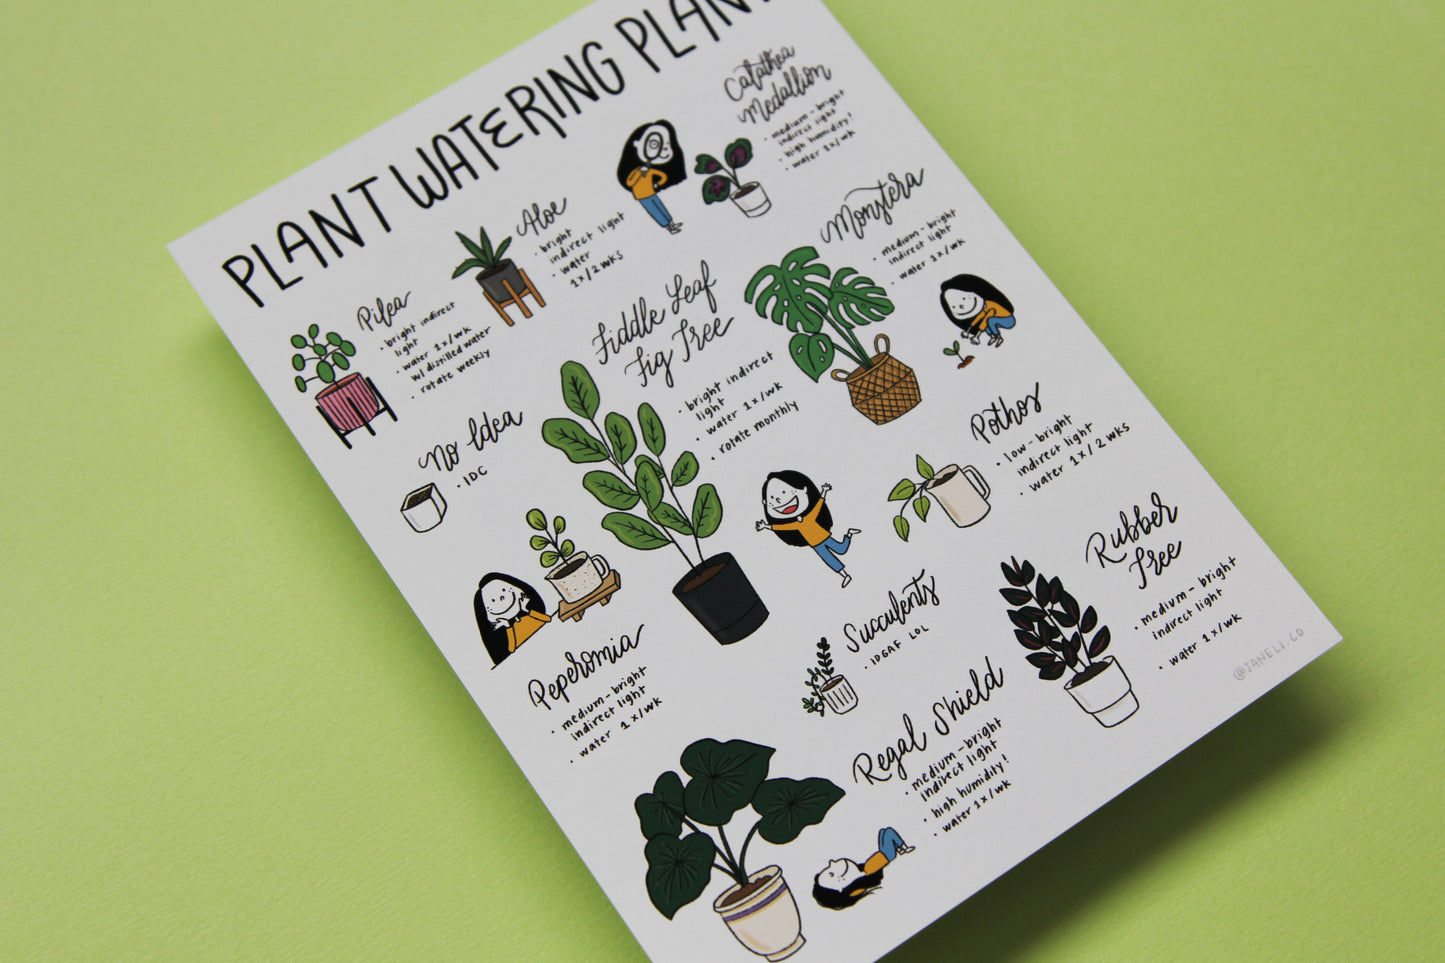 A close up of a JaneLi.Co print that says "Plant Watering Plan!" with illustrations and care instructions for 11 popular houseplants over a brown background.